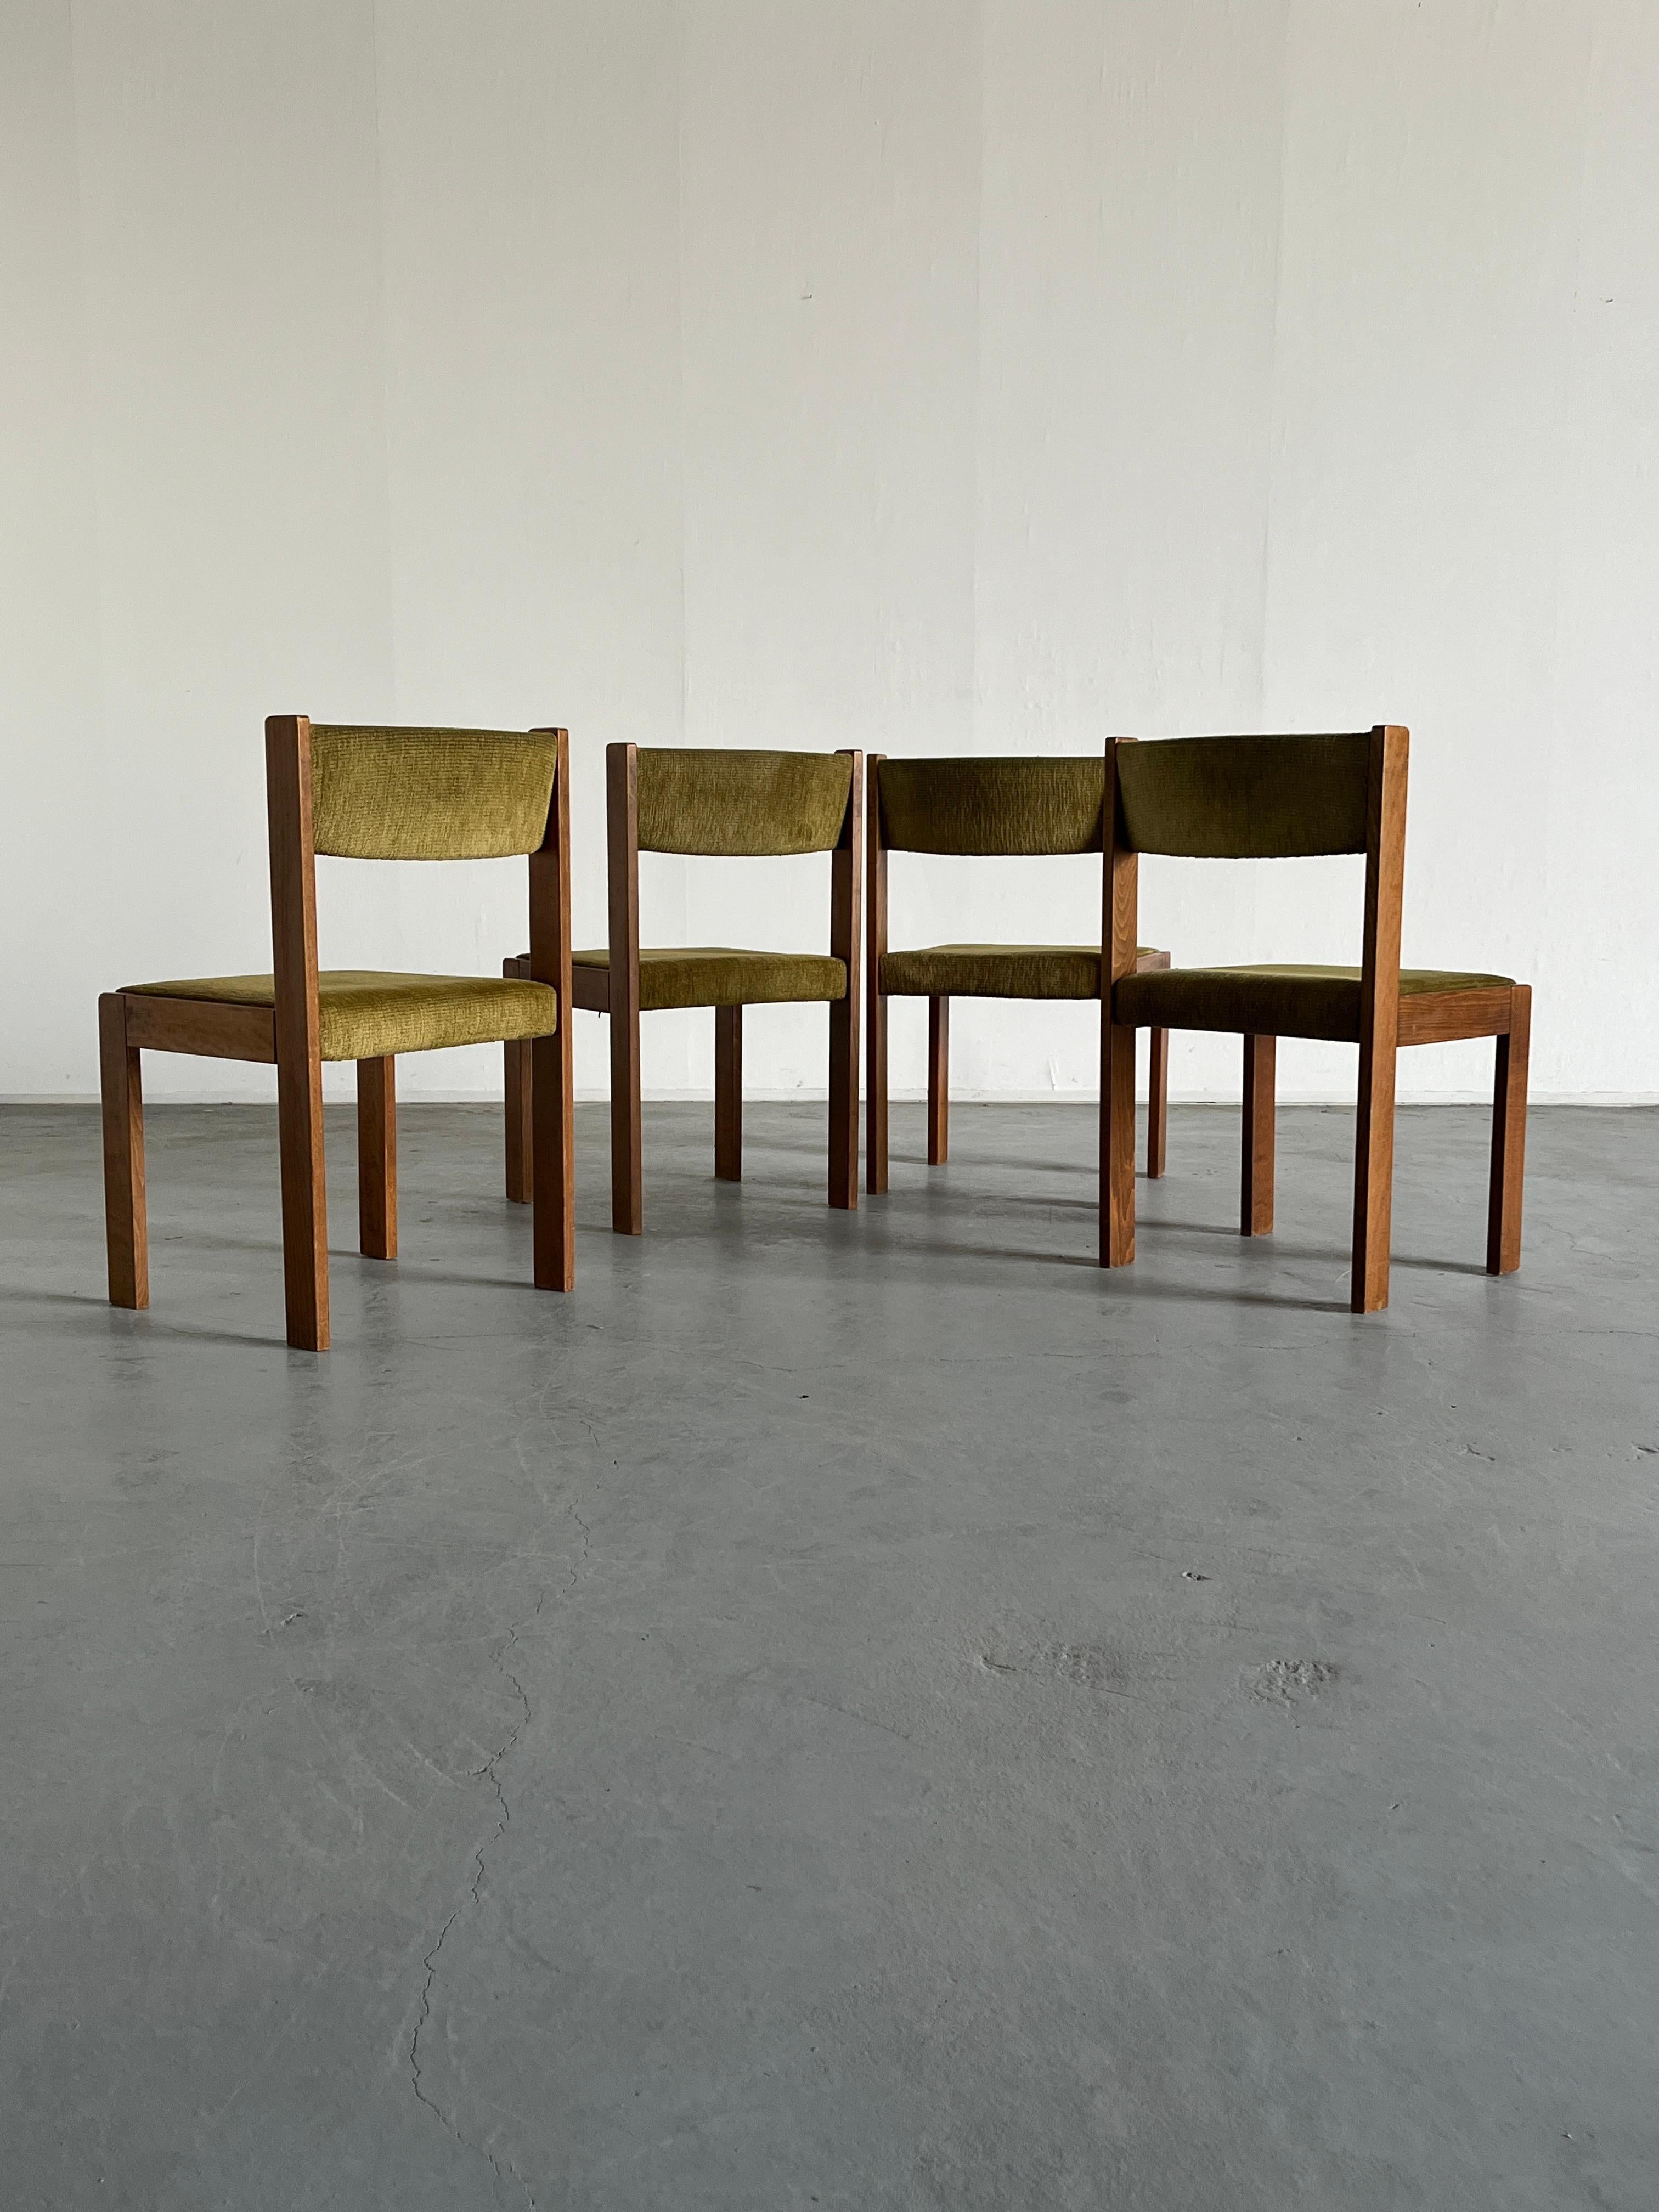 Austrian Set of 4 Mid-Century Modern Constructivist Dining Chairs by Wiesner Hager, 1960s